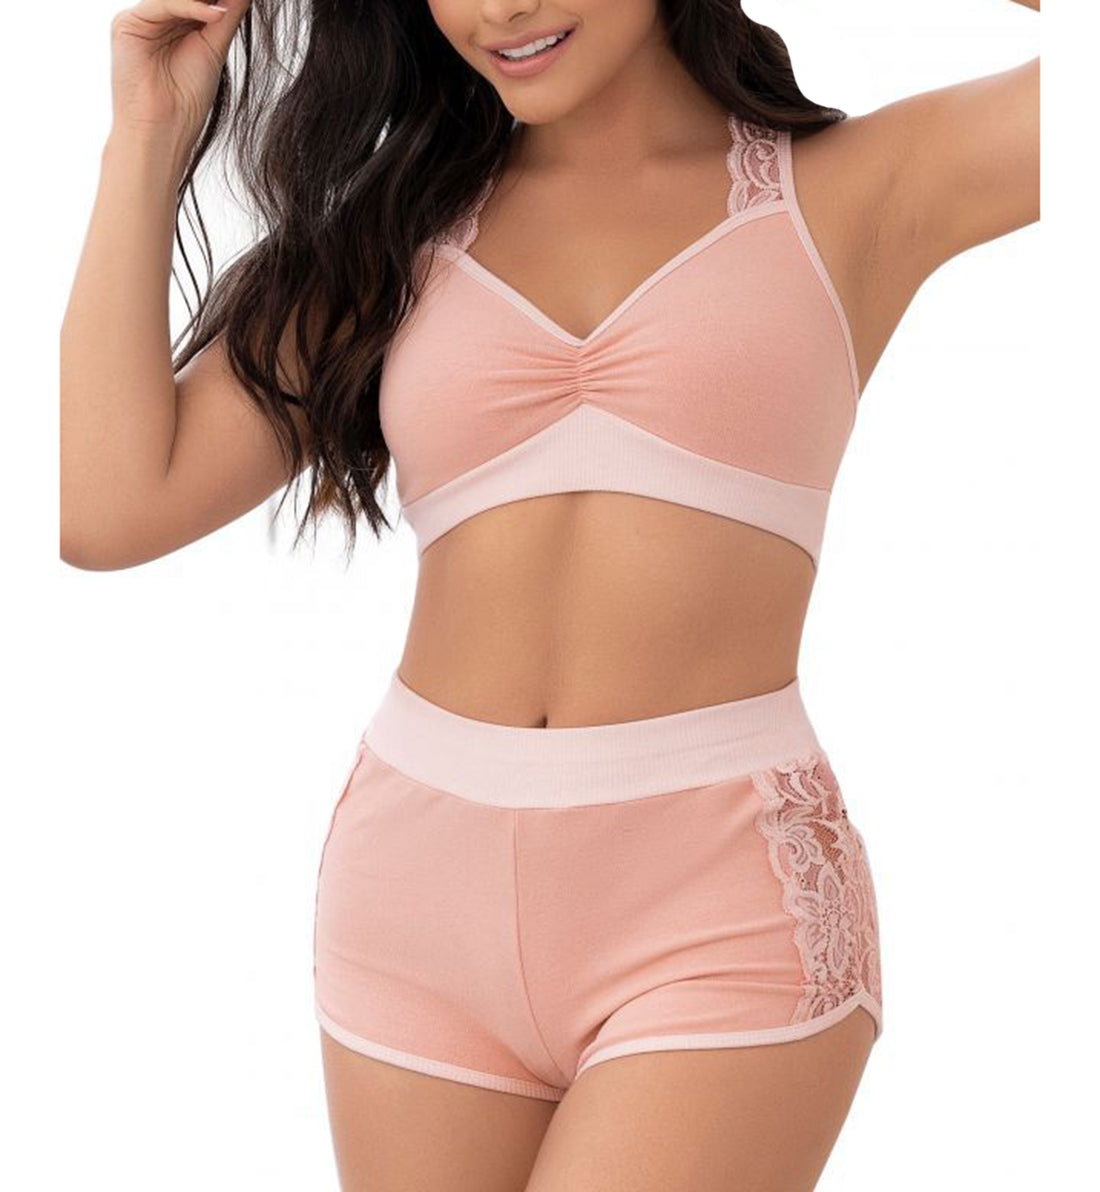 Mapale 2 Piece PJ Set: Racer Crop Top &amp; Cheeky Short (7389),Small,Rose - Rose,Small